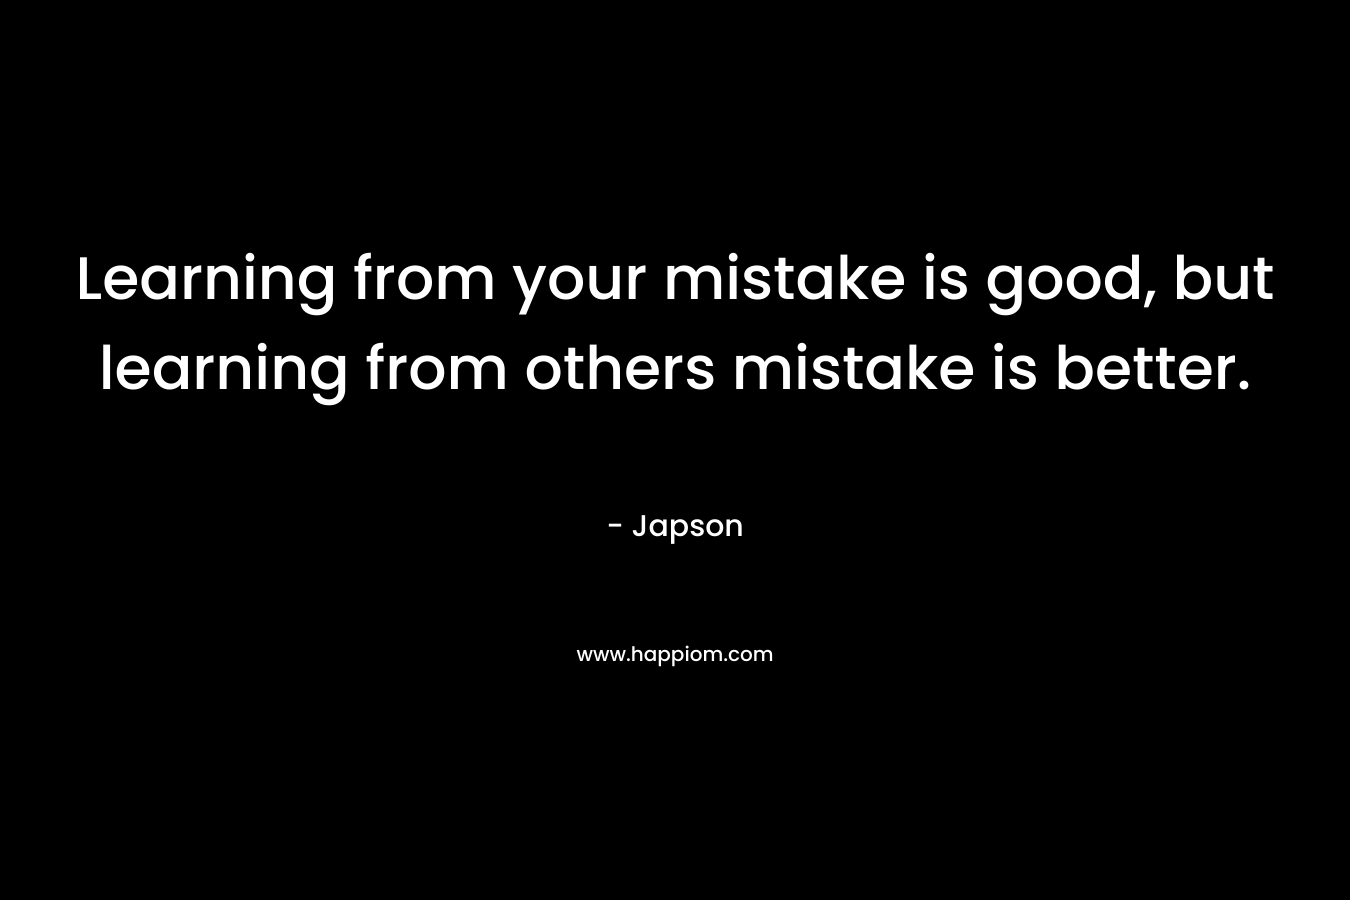 Learning from your mistake is good, but learning from others mistake is better.